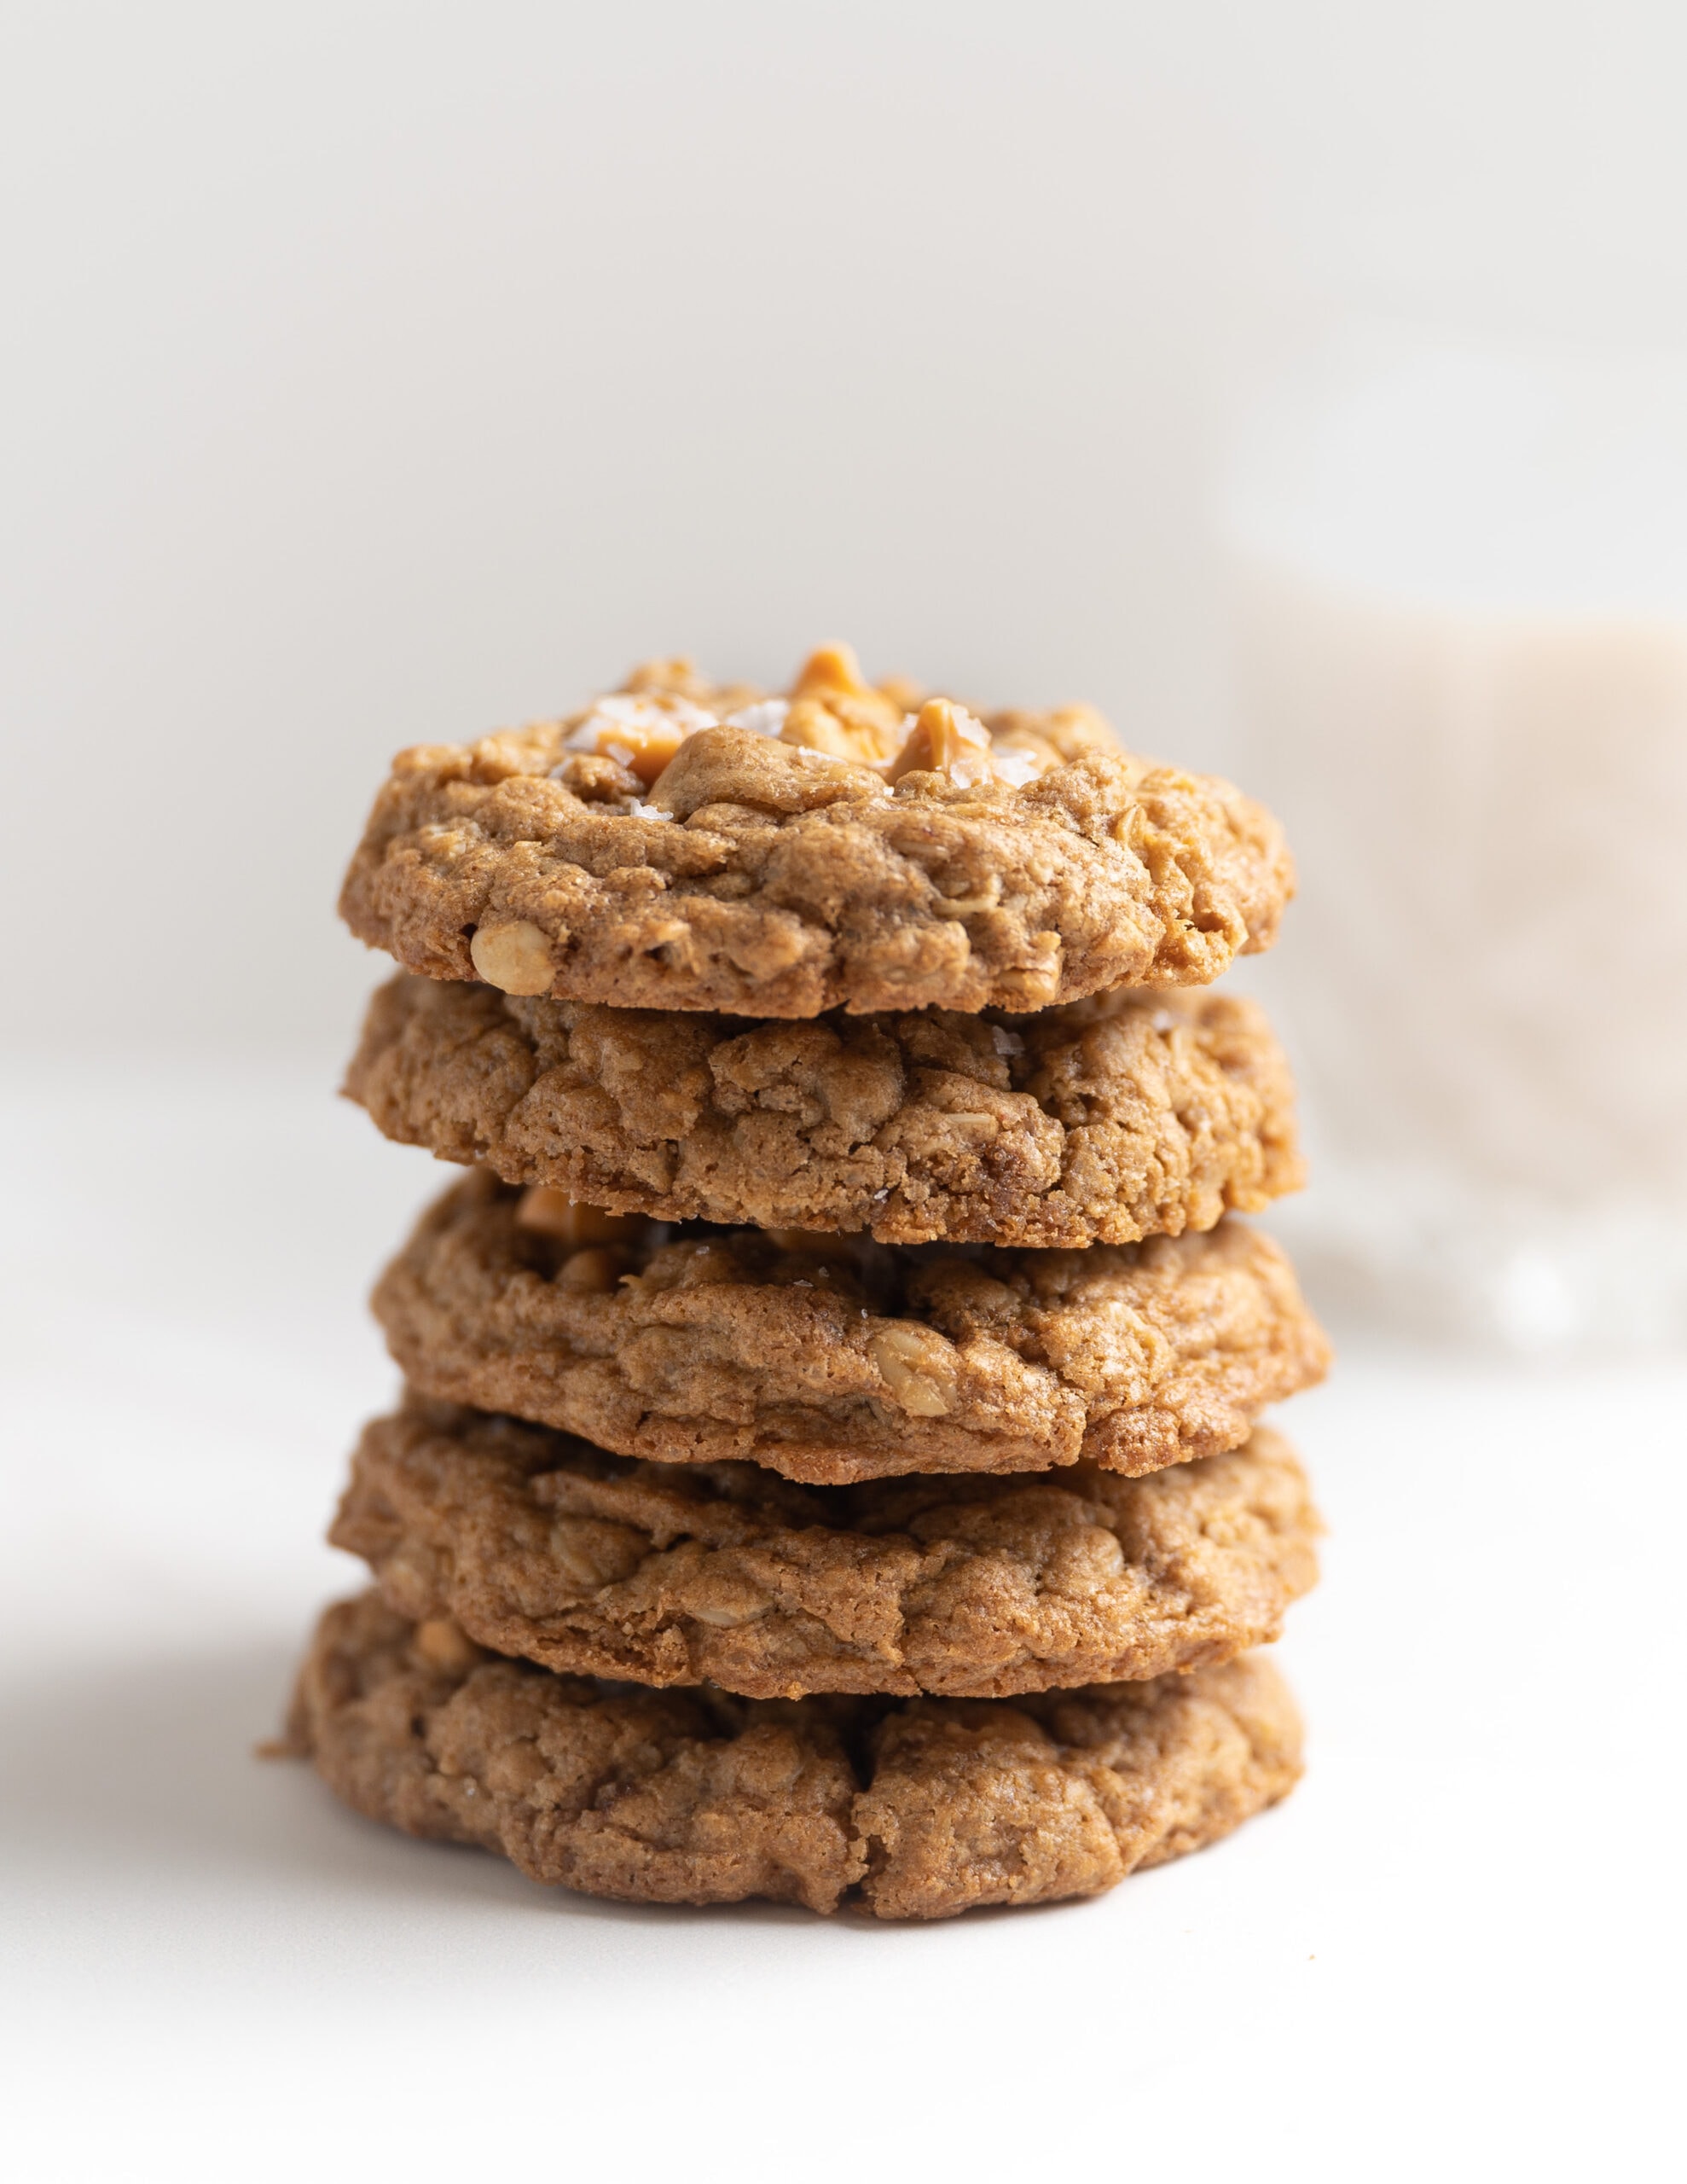 Four oatmeal butterscotch cookies stacked on top of one another with a glass of milk in the background.